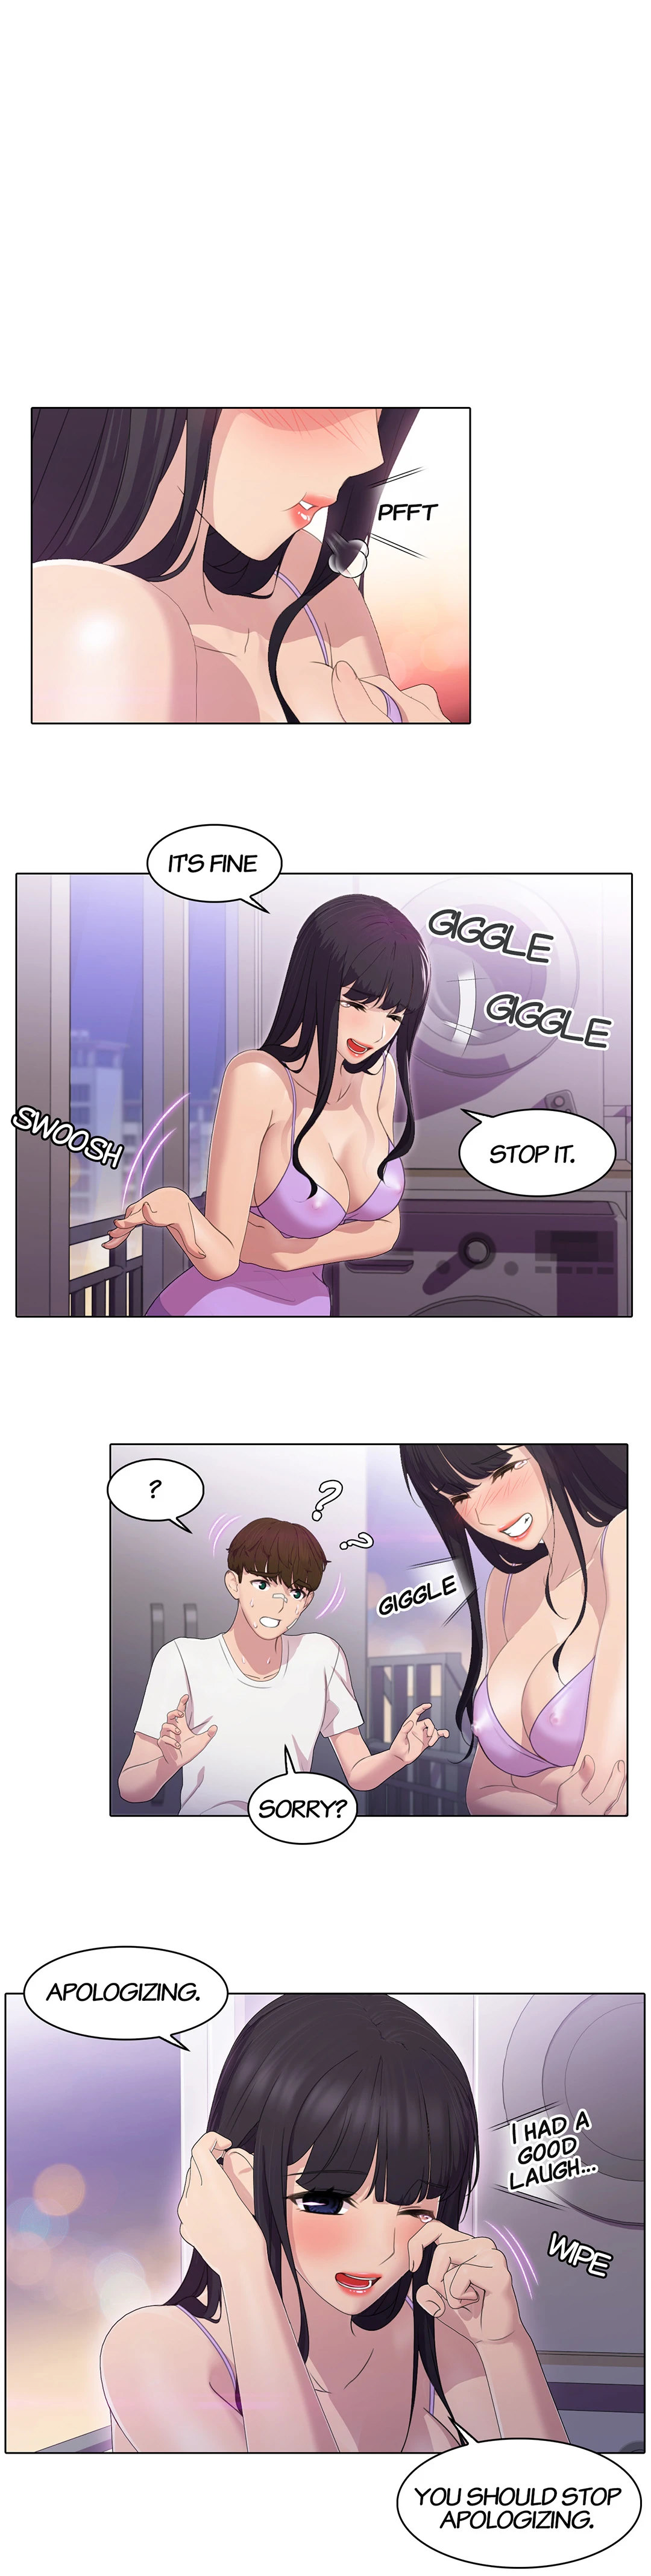 My Friend’s Sister - Chapter 2 Page 10